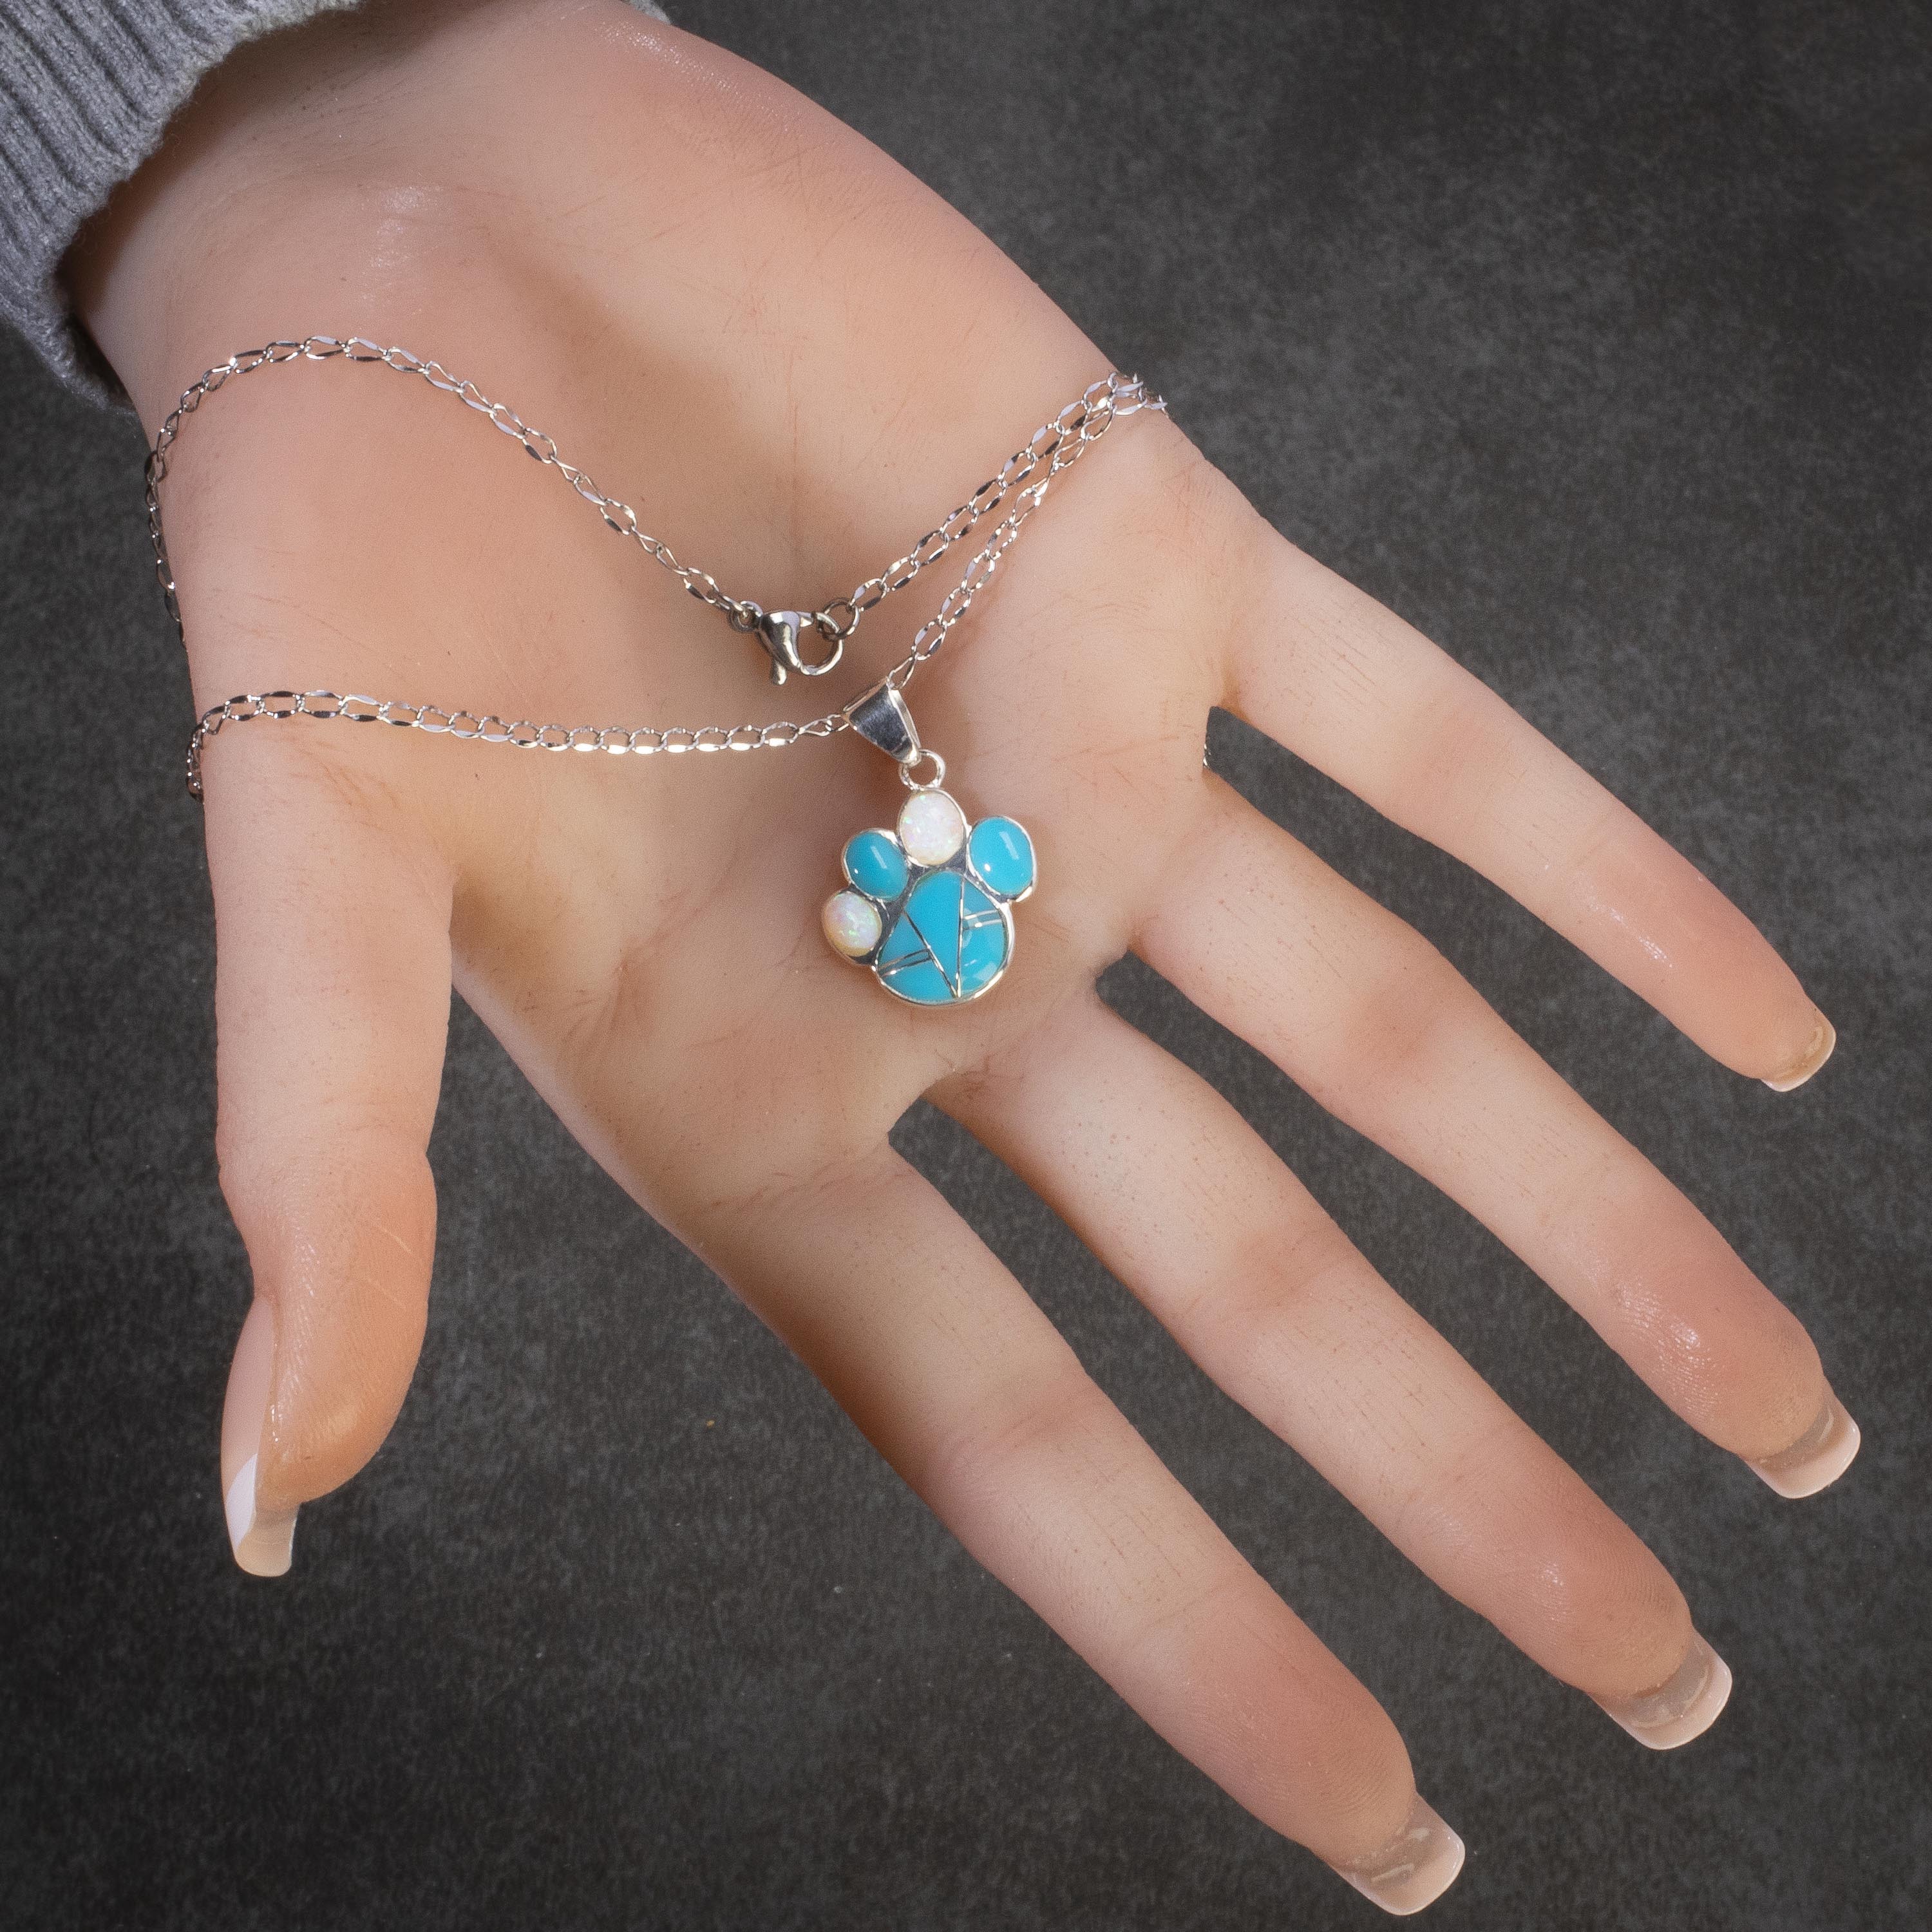 Kalifano Southwest Silver Jewelry Turquoise Dog Paw 925 Sterling Silver Pendant USA Handmade with Opal Accent NMN.2364.TQ